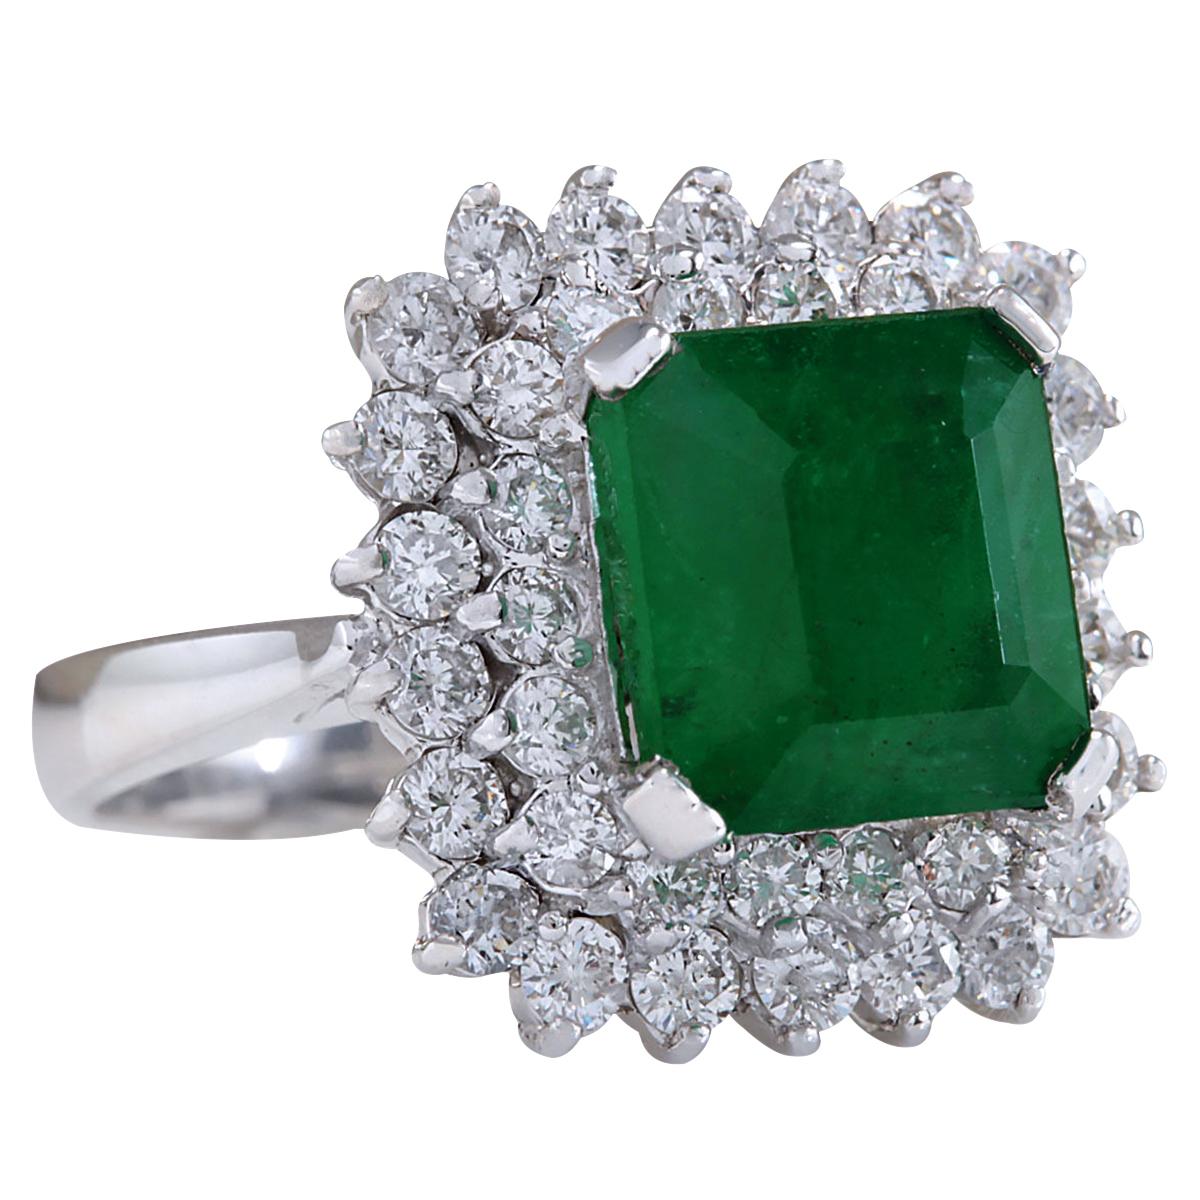 Stamped: 14K White Gold
Total Ring Weight: 7.0 Grams
Total Natural Emerald Weight is 4.12 Carat (Measures: 9.00x9.00 mm)
Color: Green
Total Natural Diamond Weight is 1.30 Carat
Color: F-G, Clarity: VS2-SI1
Face Measures: 17.20x16.30 mm
Sku: [702086W]